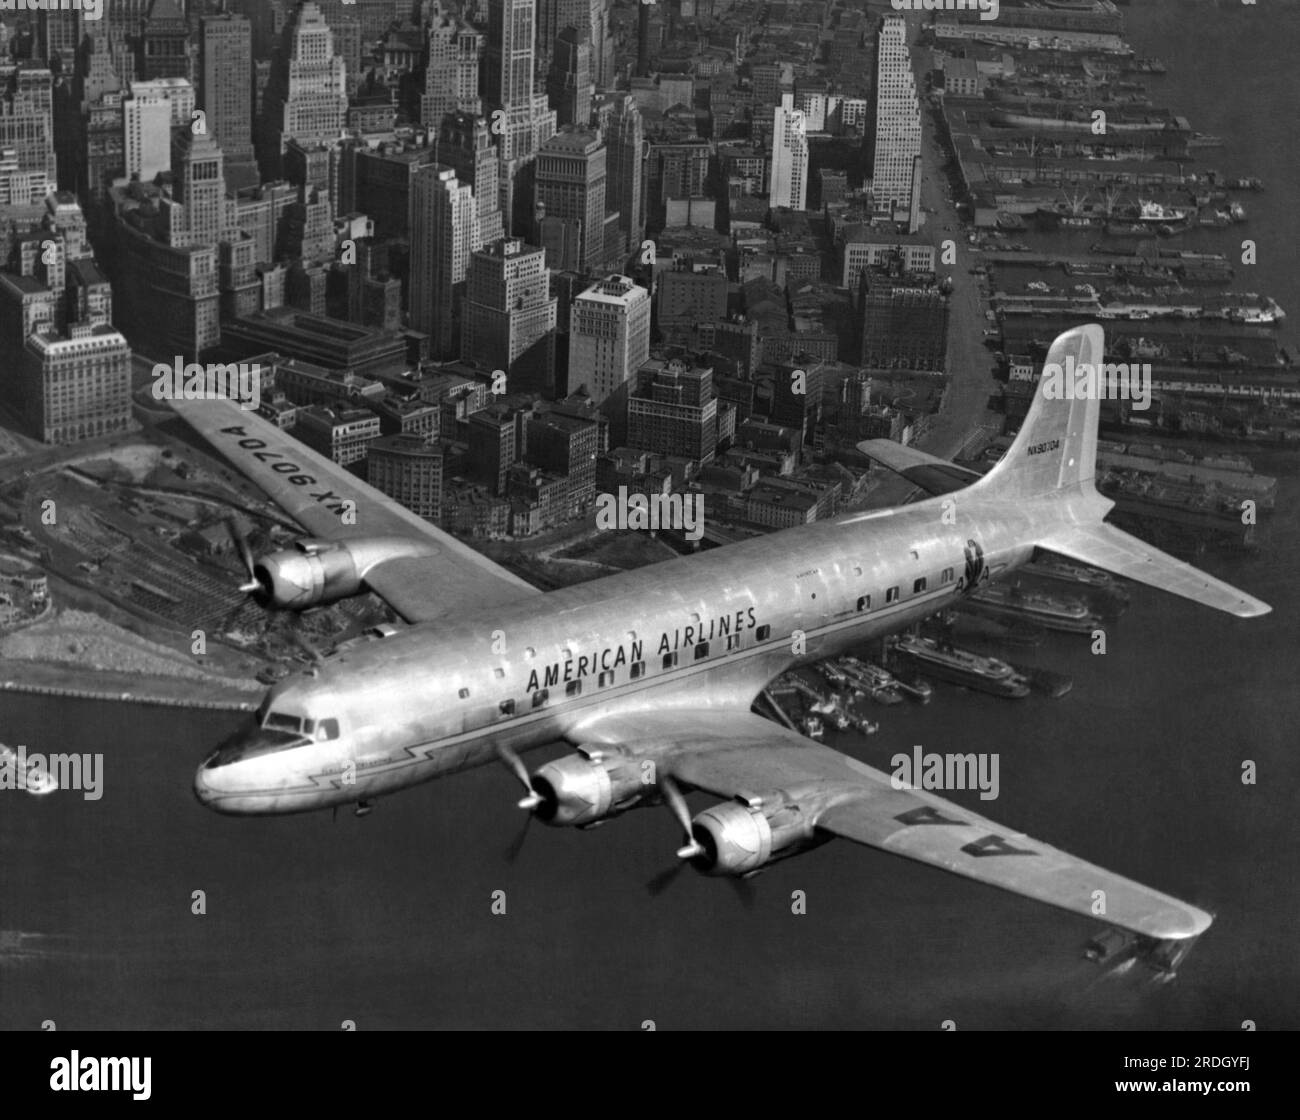 New York, New York : 1947 le DC-6 amiral d'American Airlines, 'Oklahoma', survolant New York. Banque D'Images